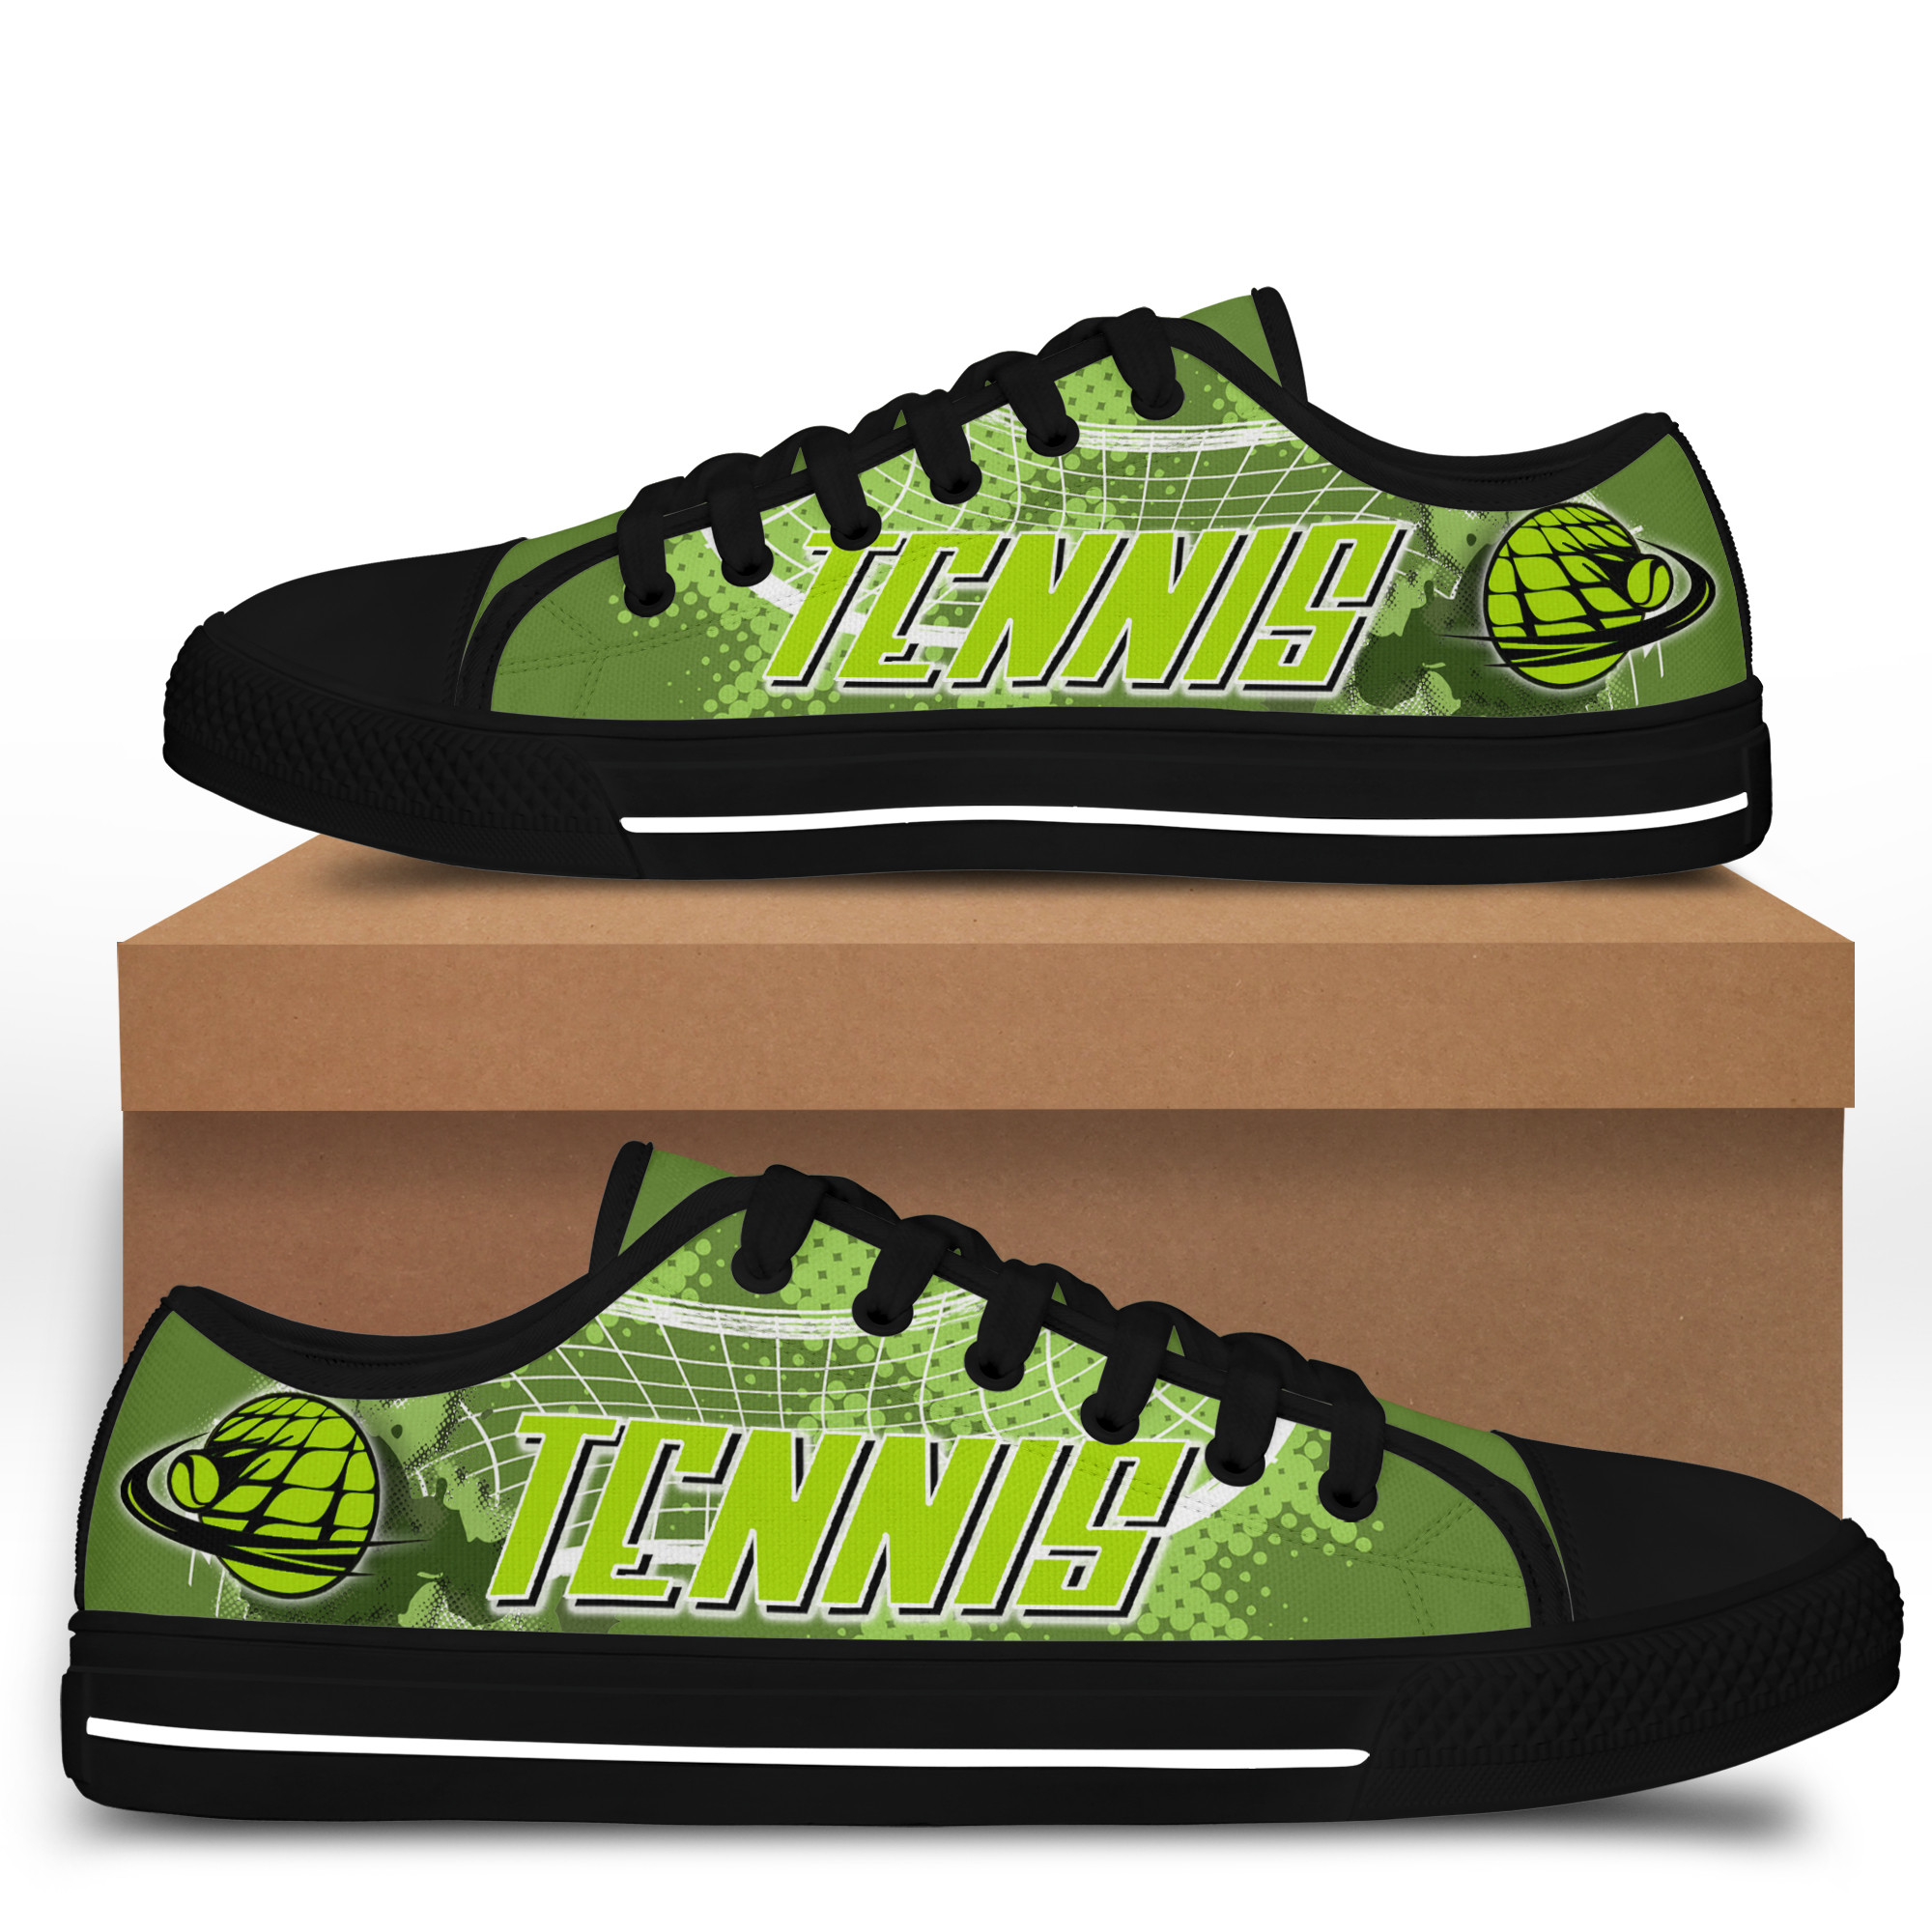 Tennis Ball Printed On Low Top Shoes